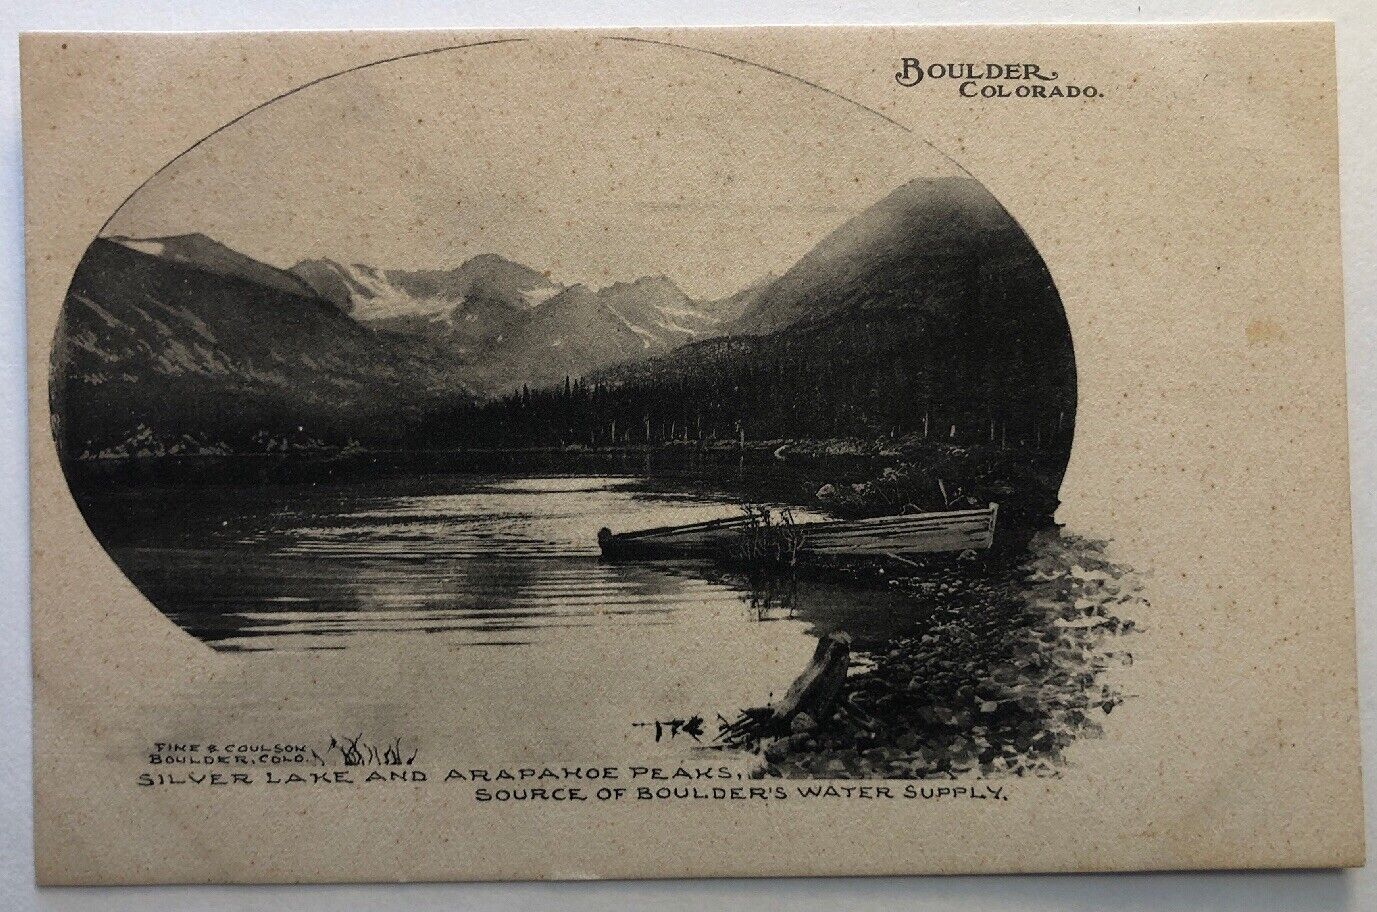 Silver Lake and Arapahoe Peaks Source Boulder's Water Supply Boulder CO printed